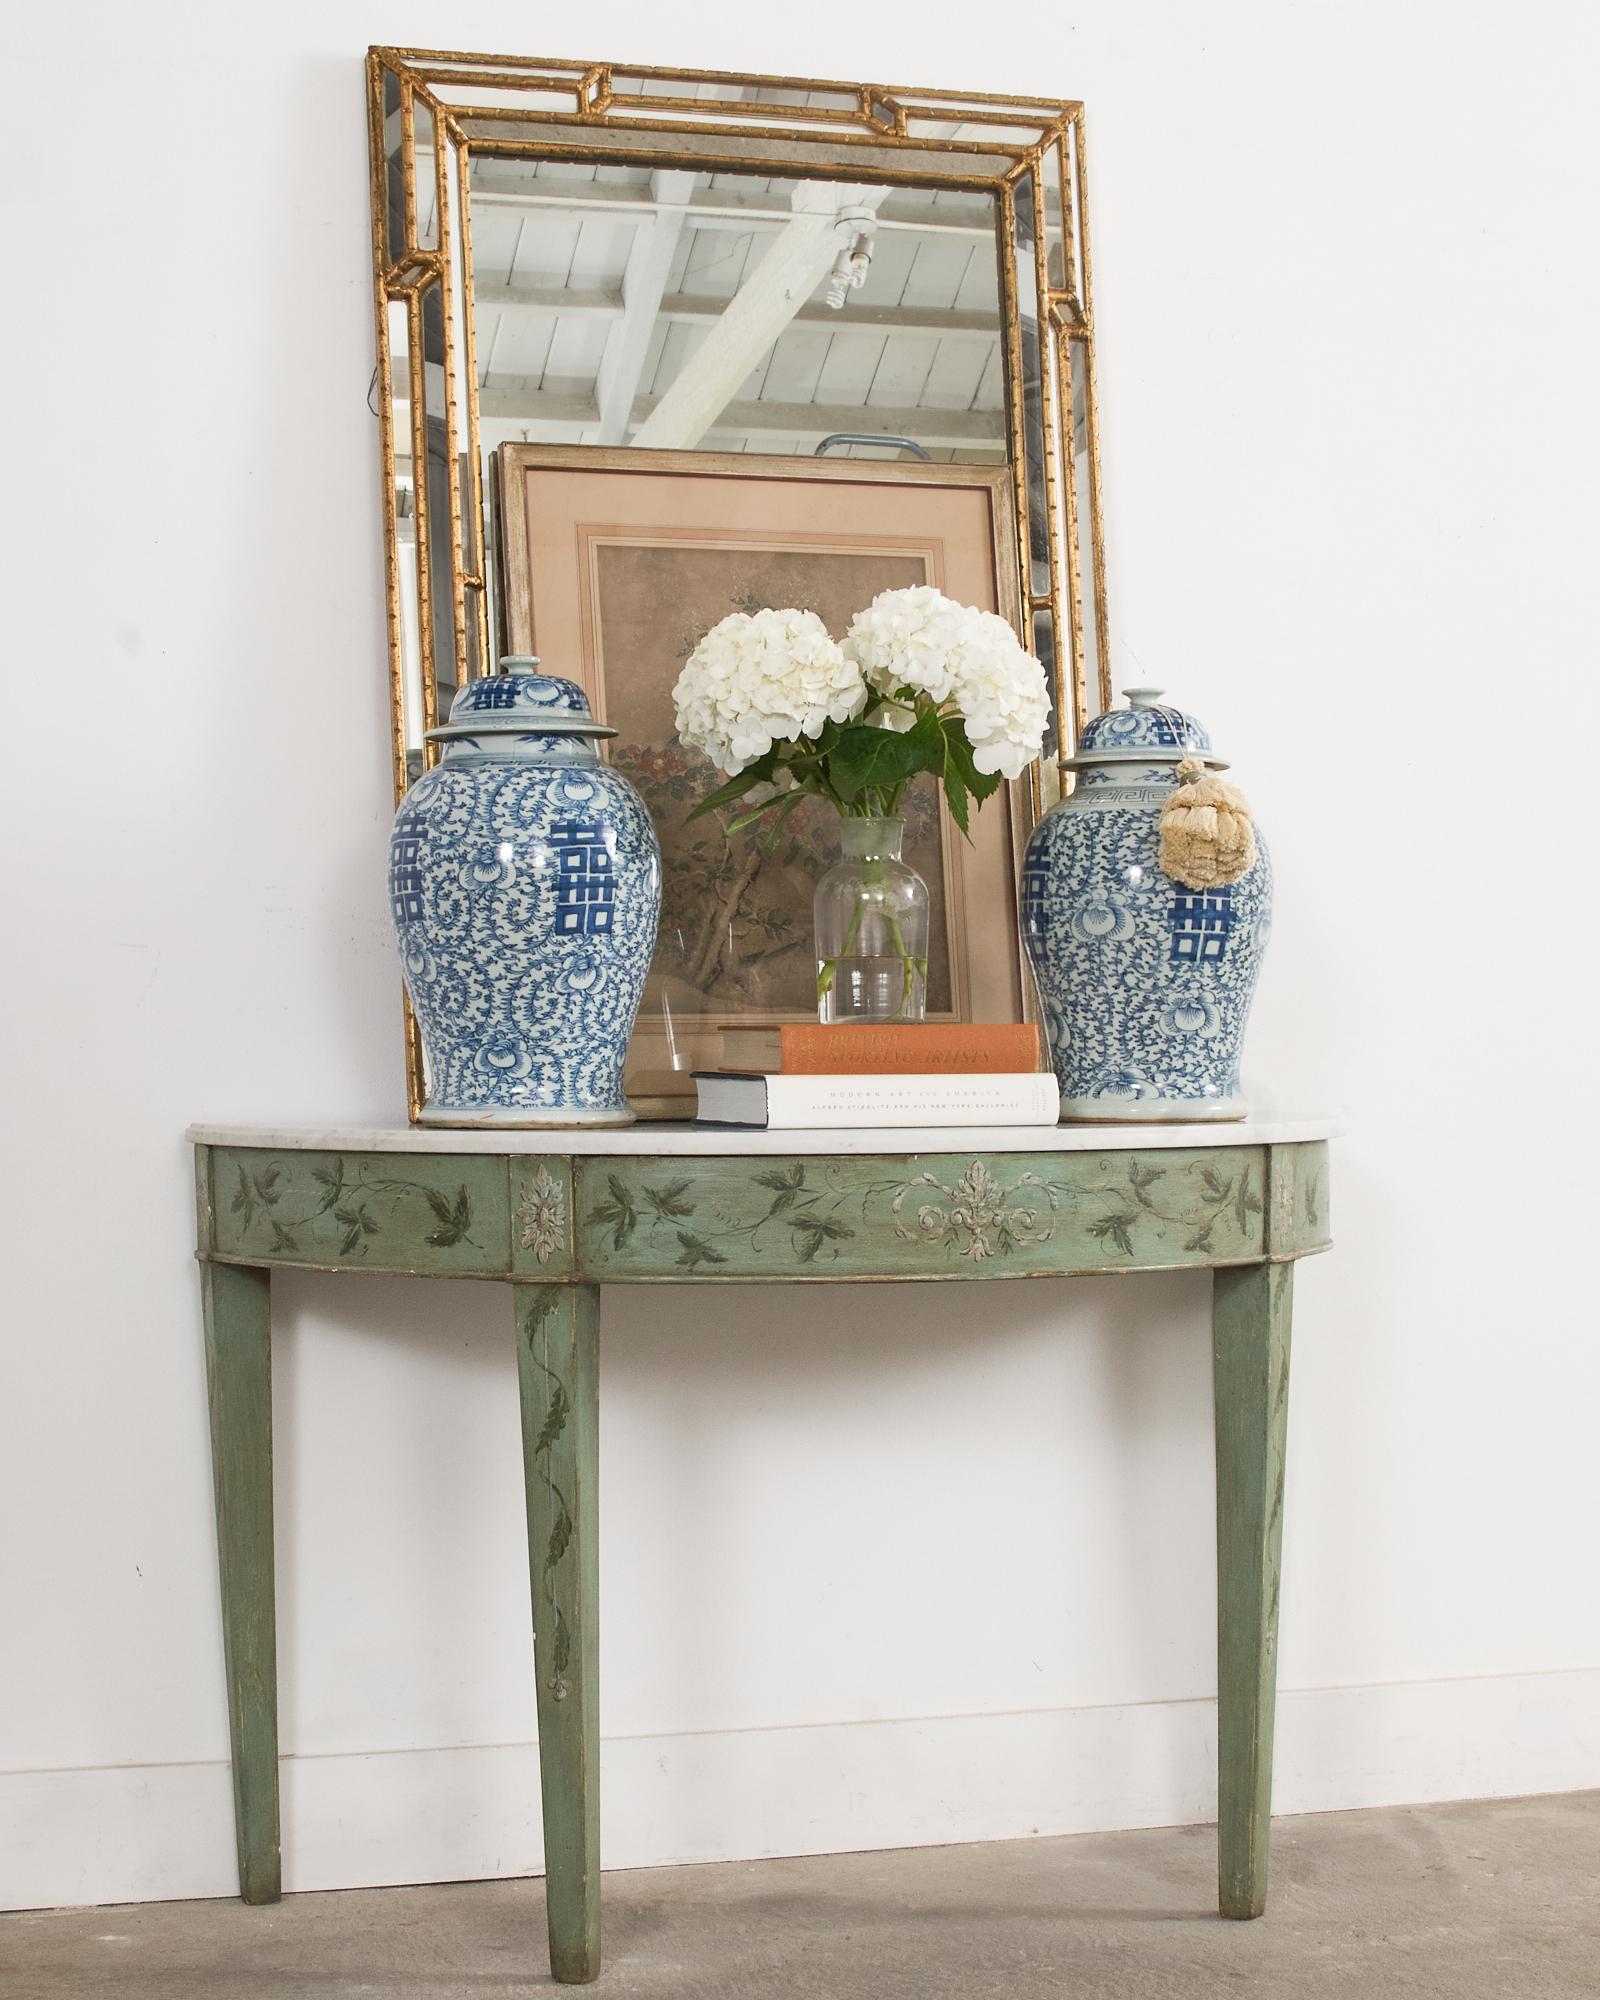 Fantastic pair of mint green painted demi-lune console tables featuring  dramatic Carrara marble tops. Crafted from pine and made in the Swedish Gustavian taste with hand-painted floral and foliate reserves on the apron and legs. The Carrara marble